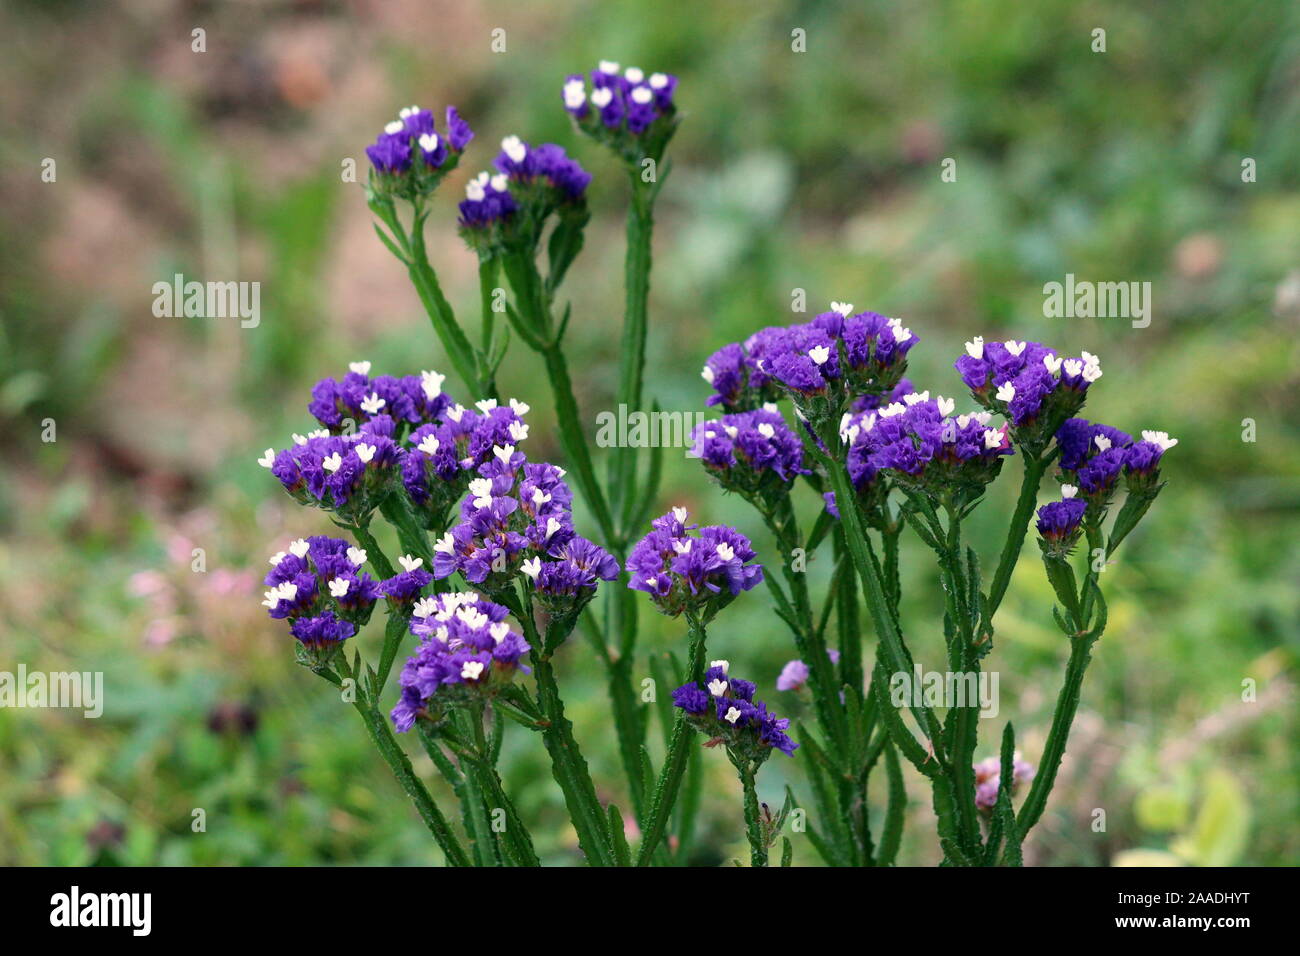 Closeup of Statice or Limonium sinuatum or Wavyleaf sea lavender or Sea lavender or Notch leaf marsh rosemary or Sea pink short lived perennial plant Stock Photo